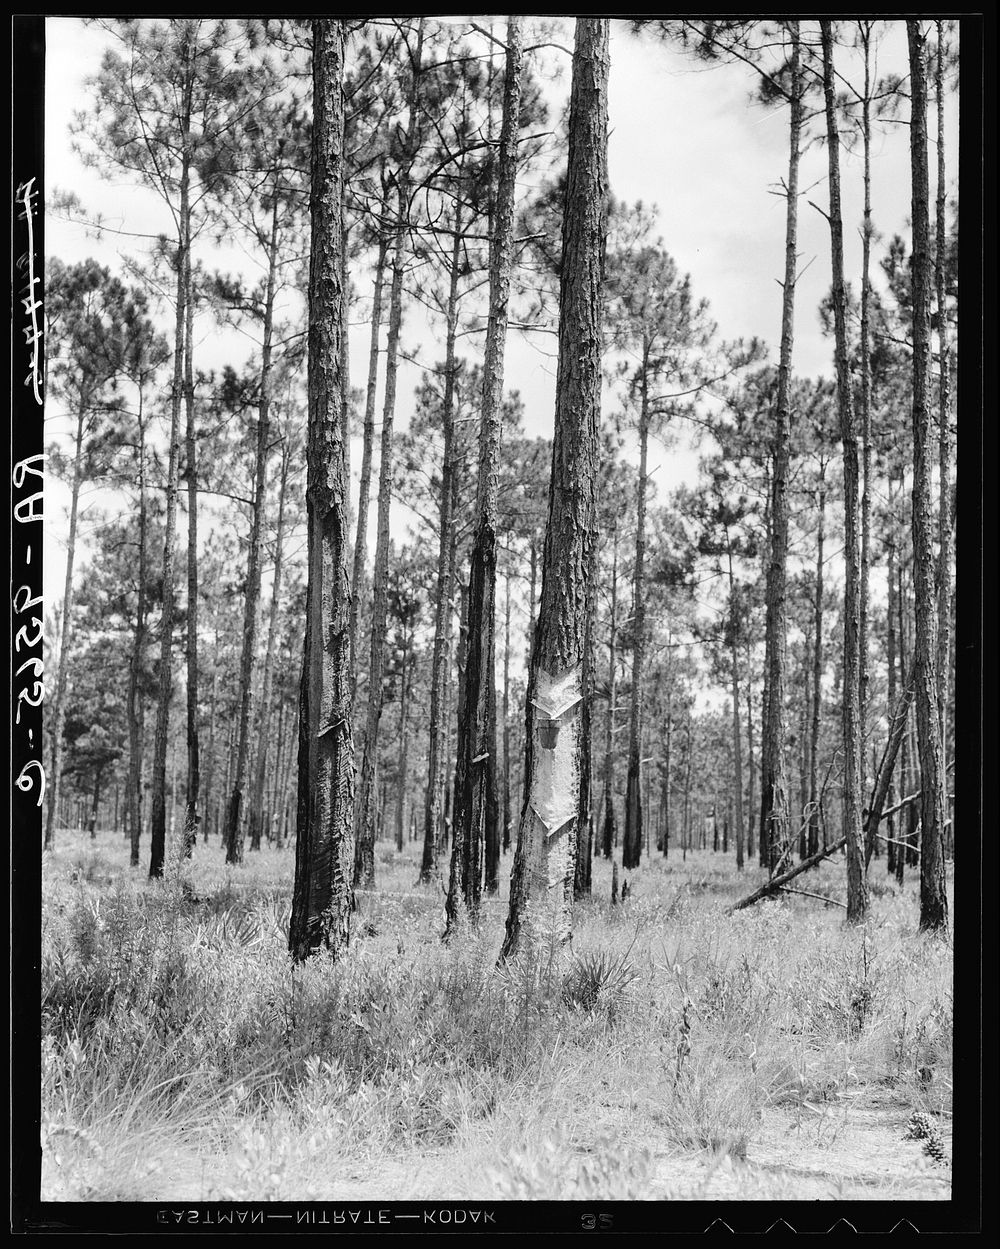 Turpentine trees in northern Florida. Sourced from the Library of Congress.